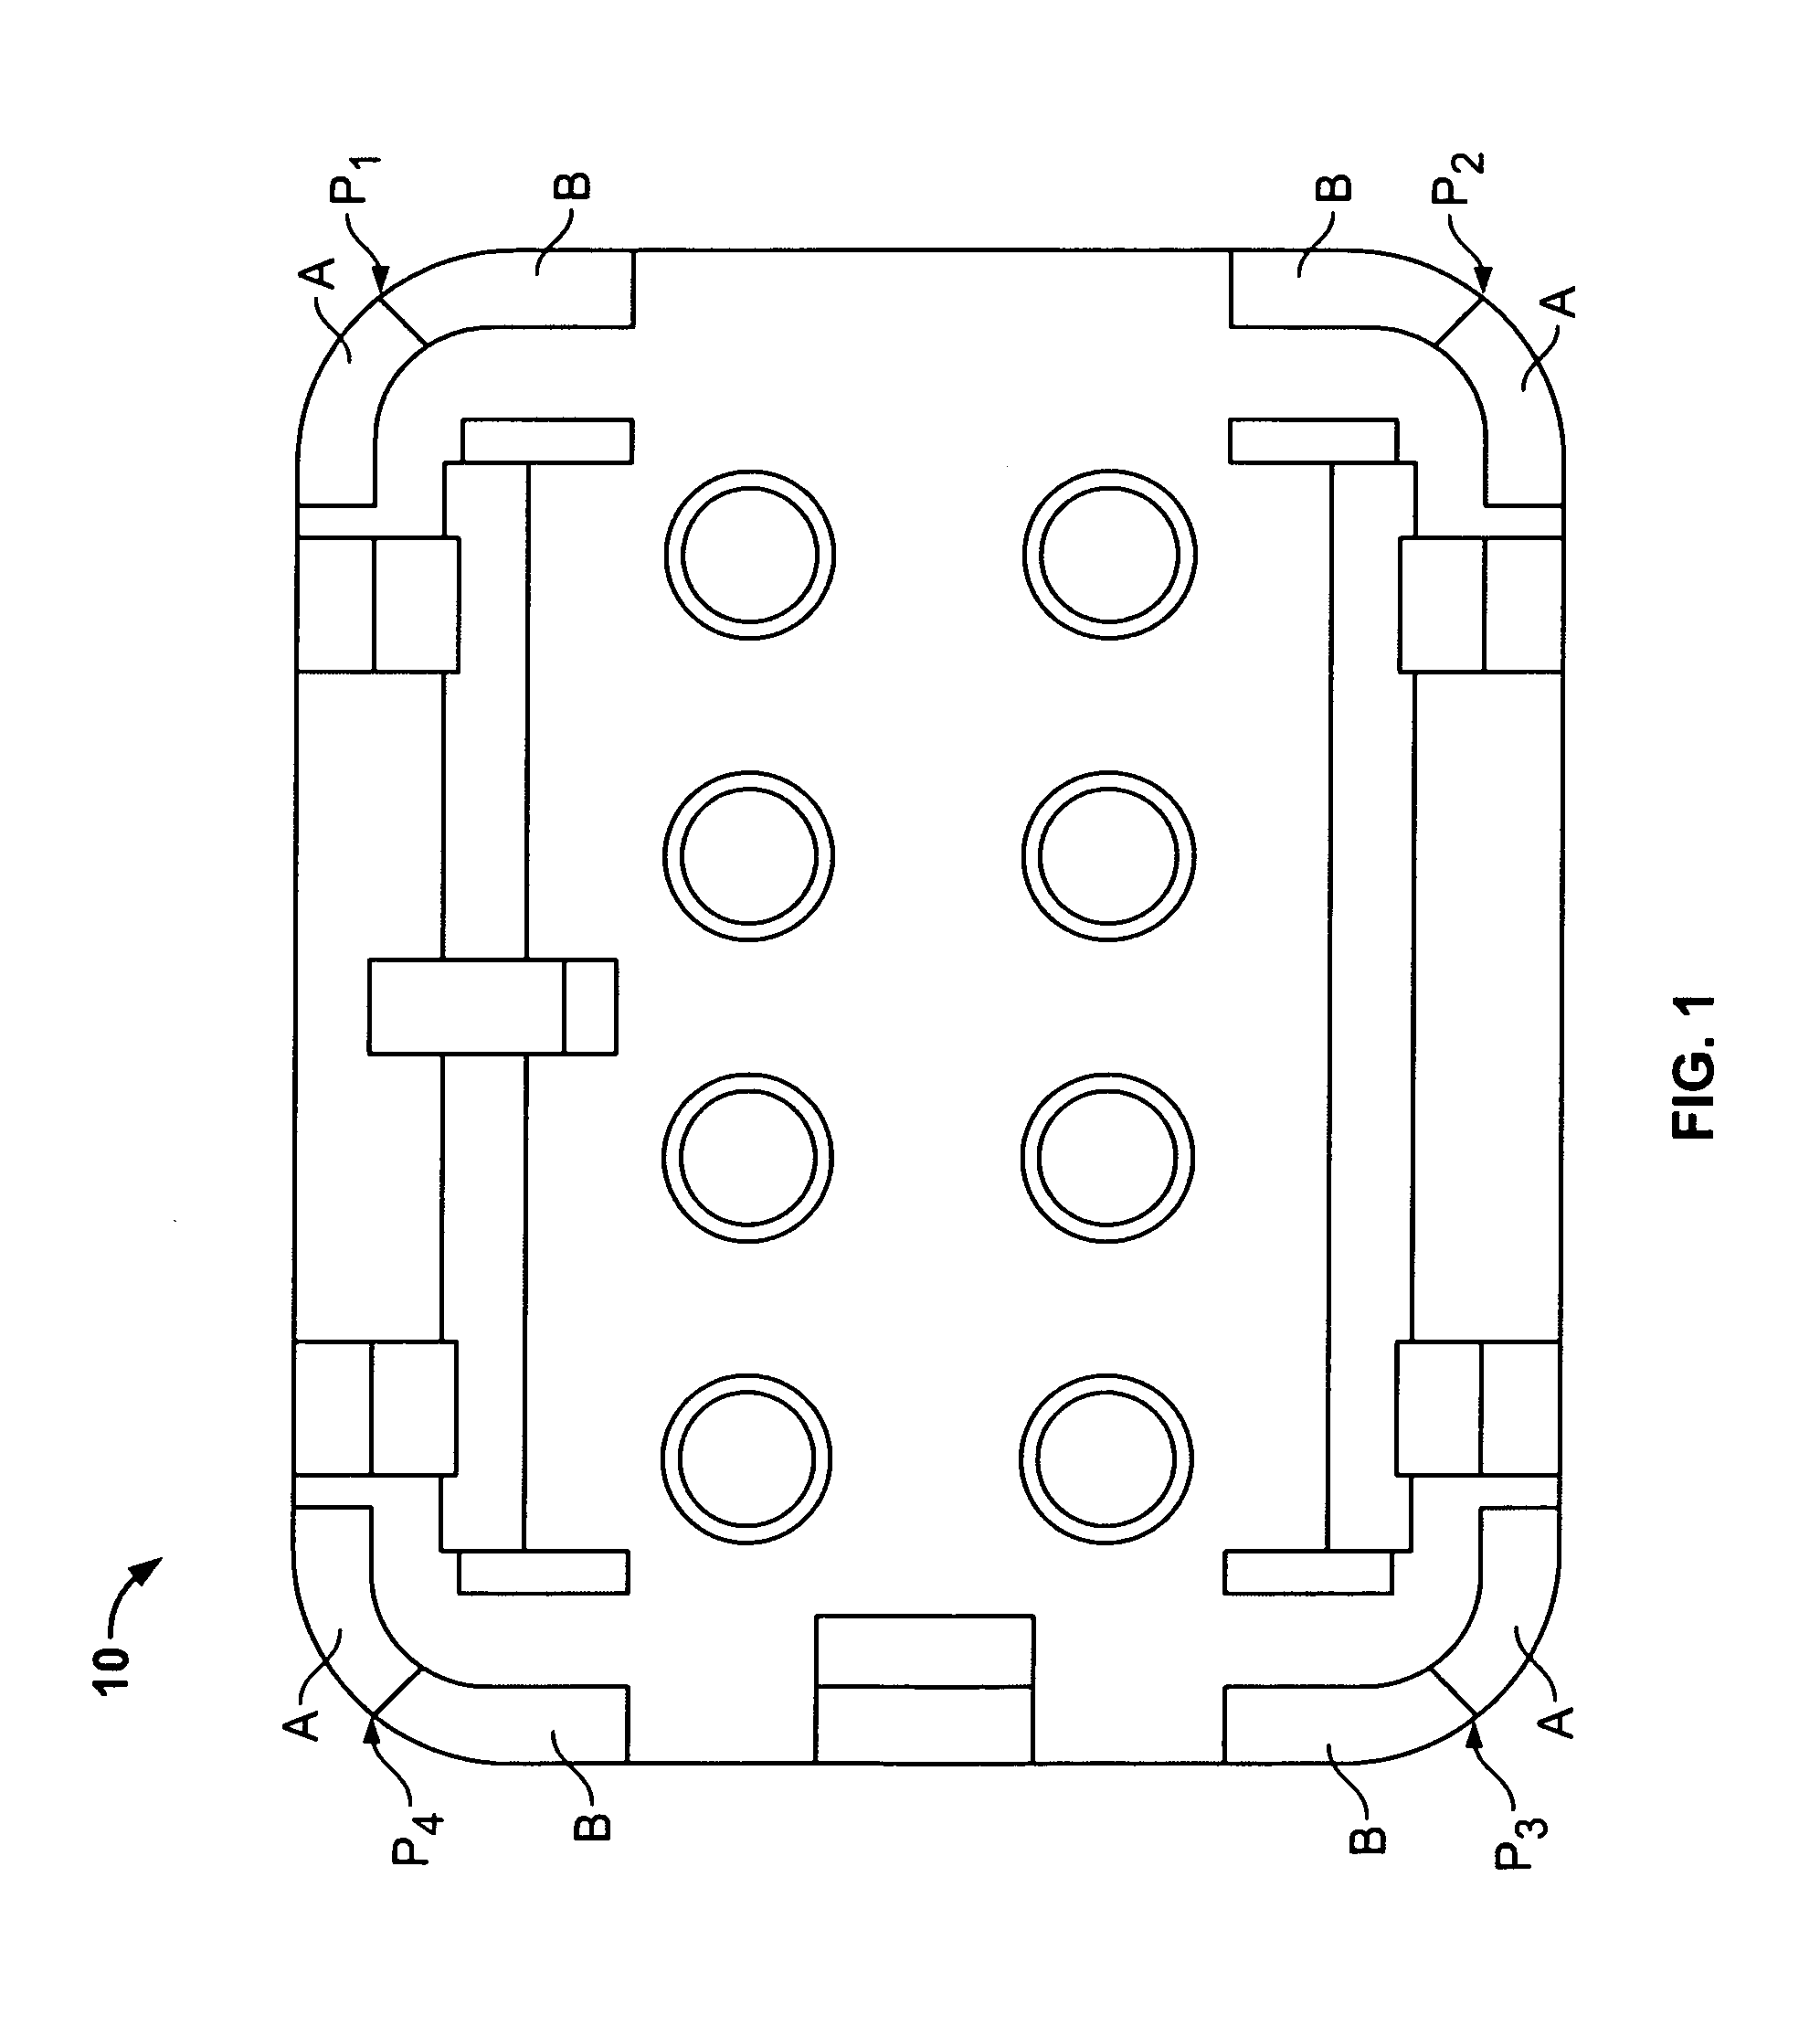 Terminal position assurance with forward interlocking face keying